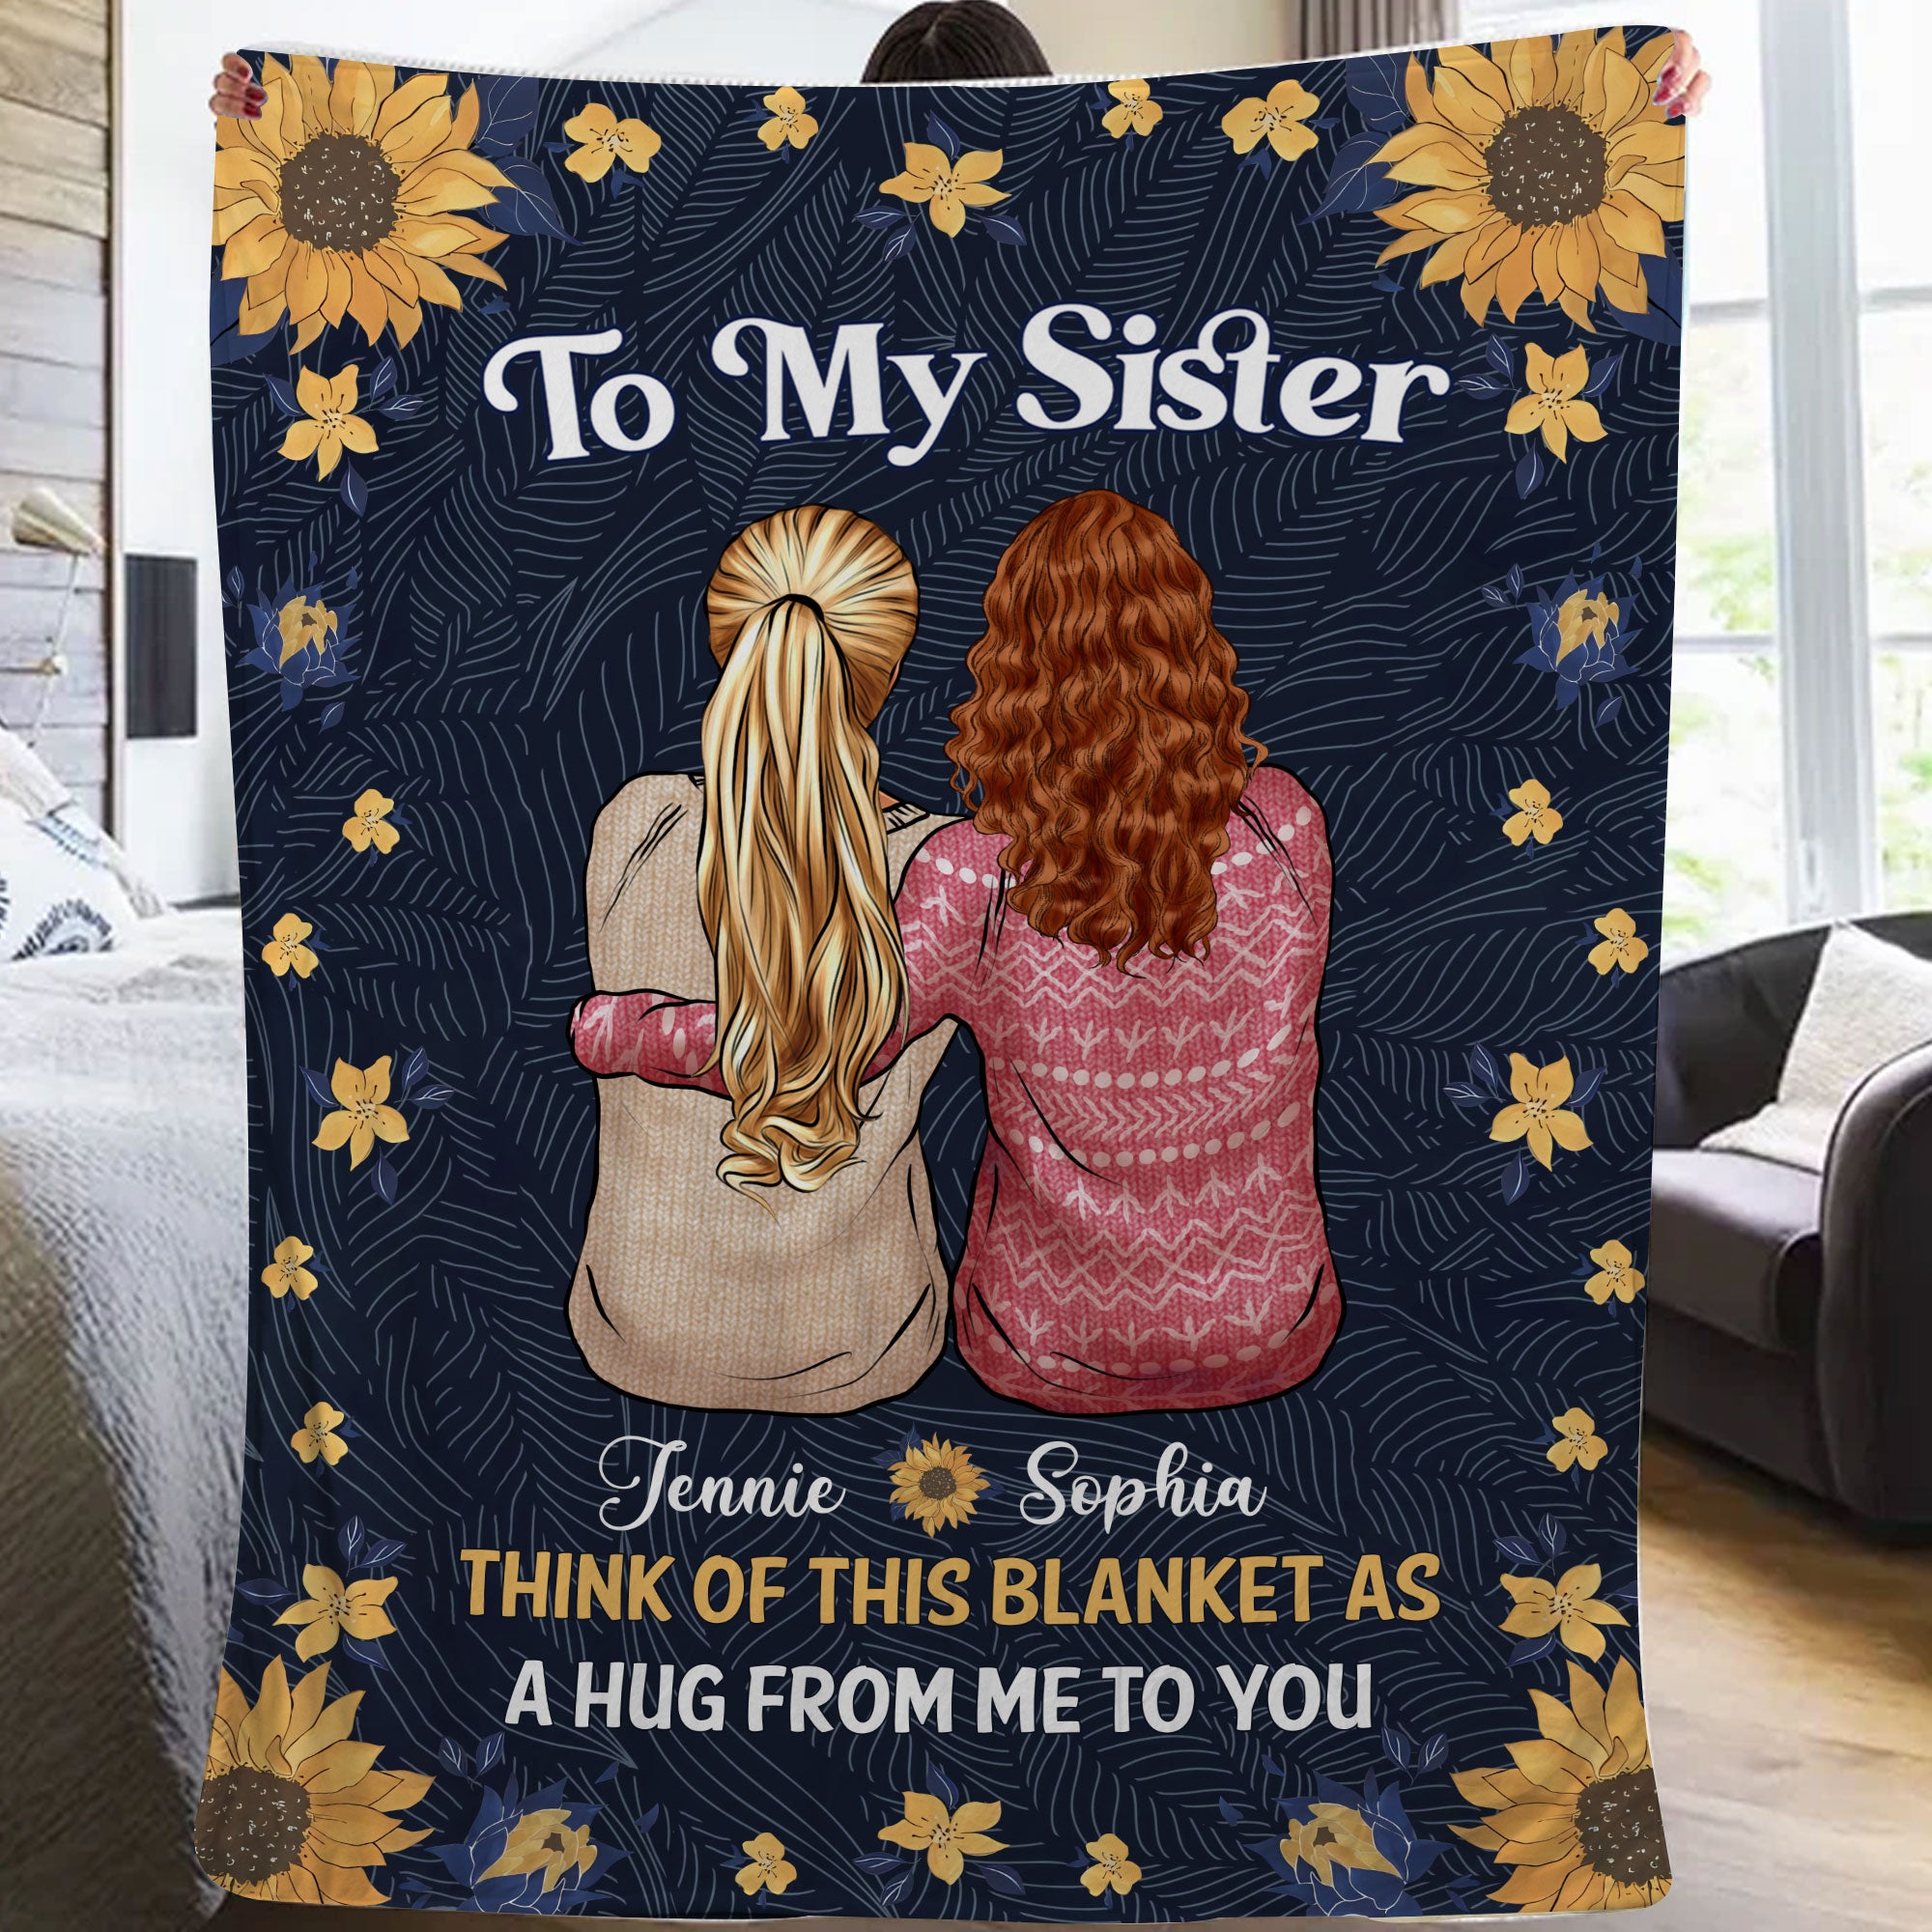 Think Of This As A Hug From Me To You - Custom Appearances And Names - Personalized Fleece Blanket - Gift For Best Friend, Sister, Besties